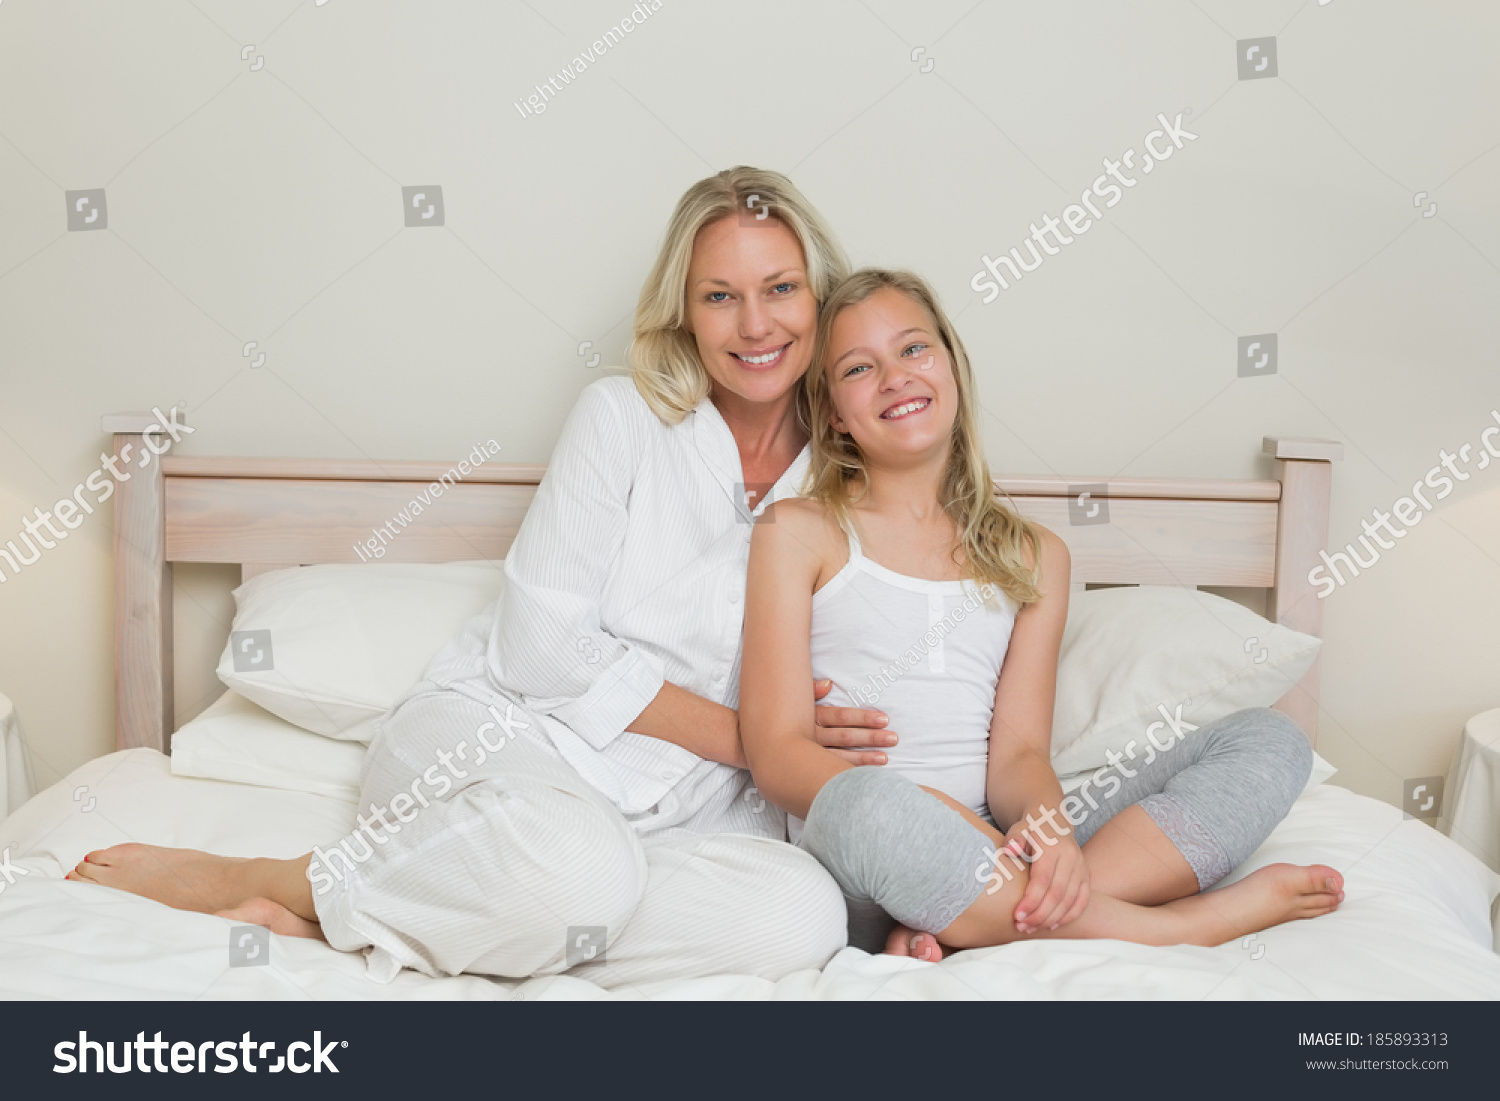 Sharing moms bed images